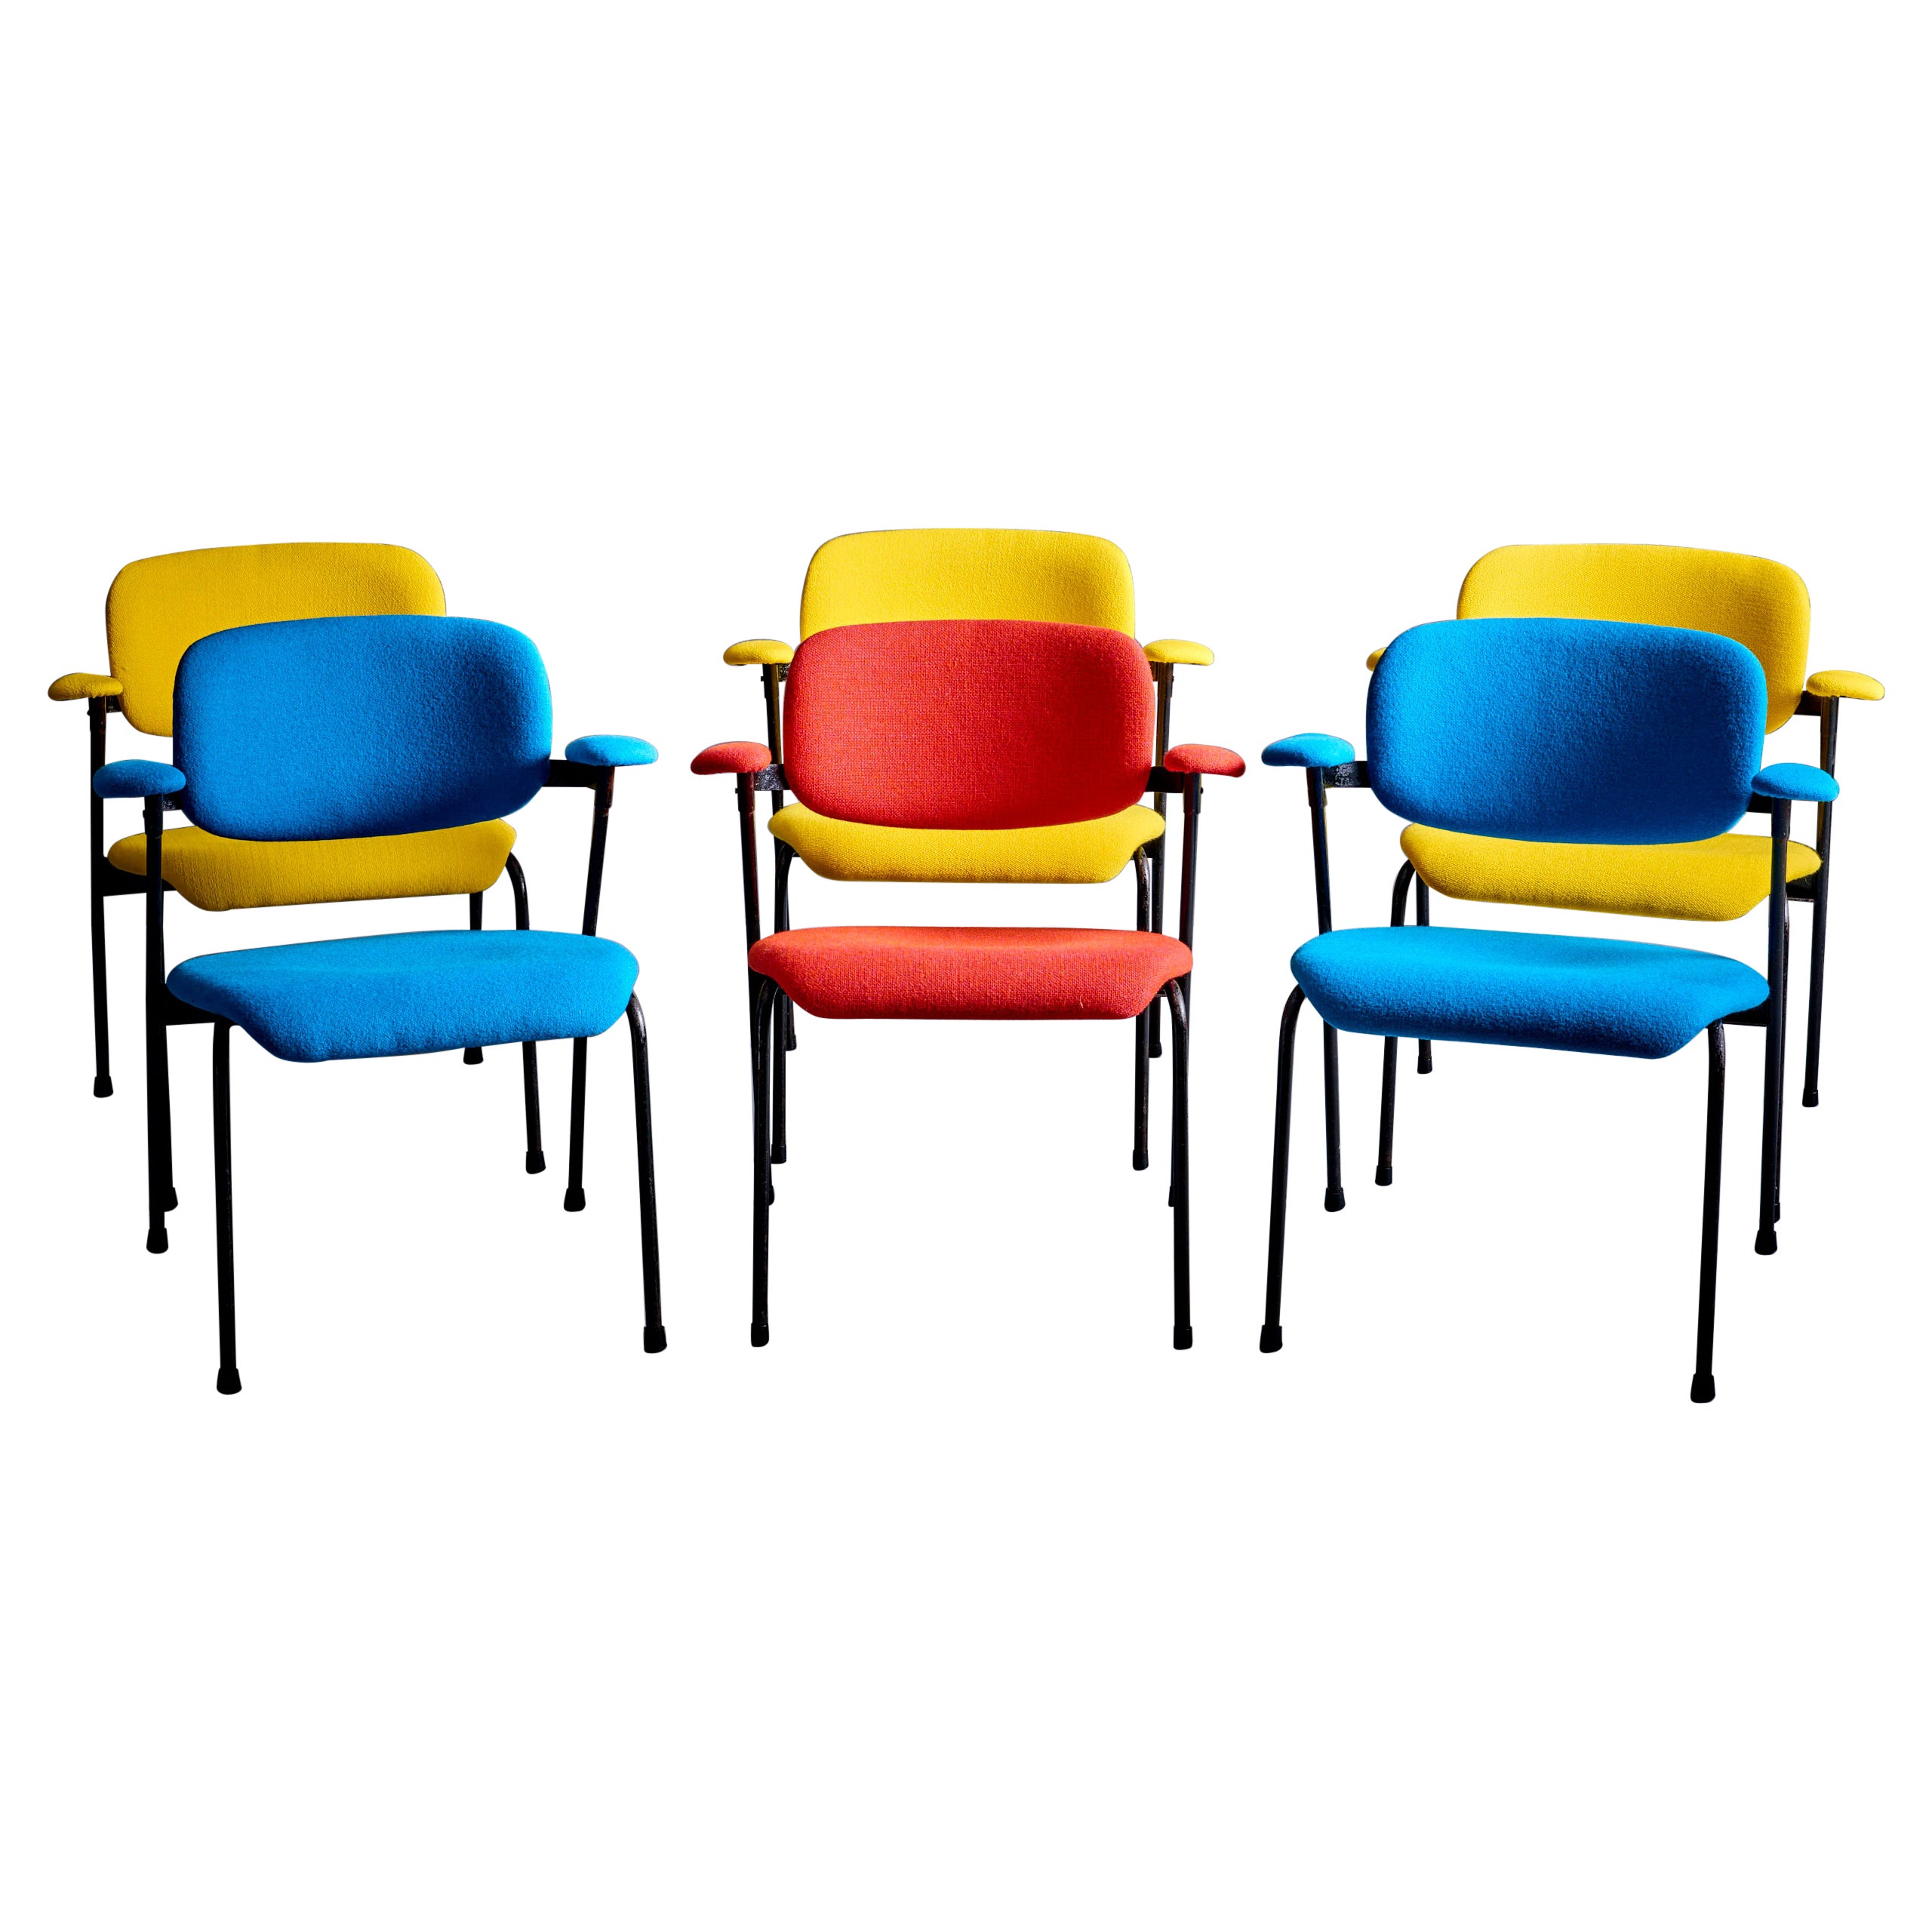 Willy van der Meeren for Tubax Set of 6 Lounge Chairs in blue, red, yellow 1950s For Sale